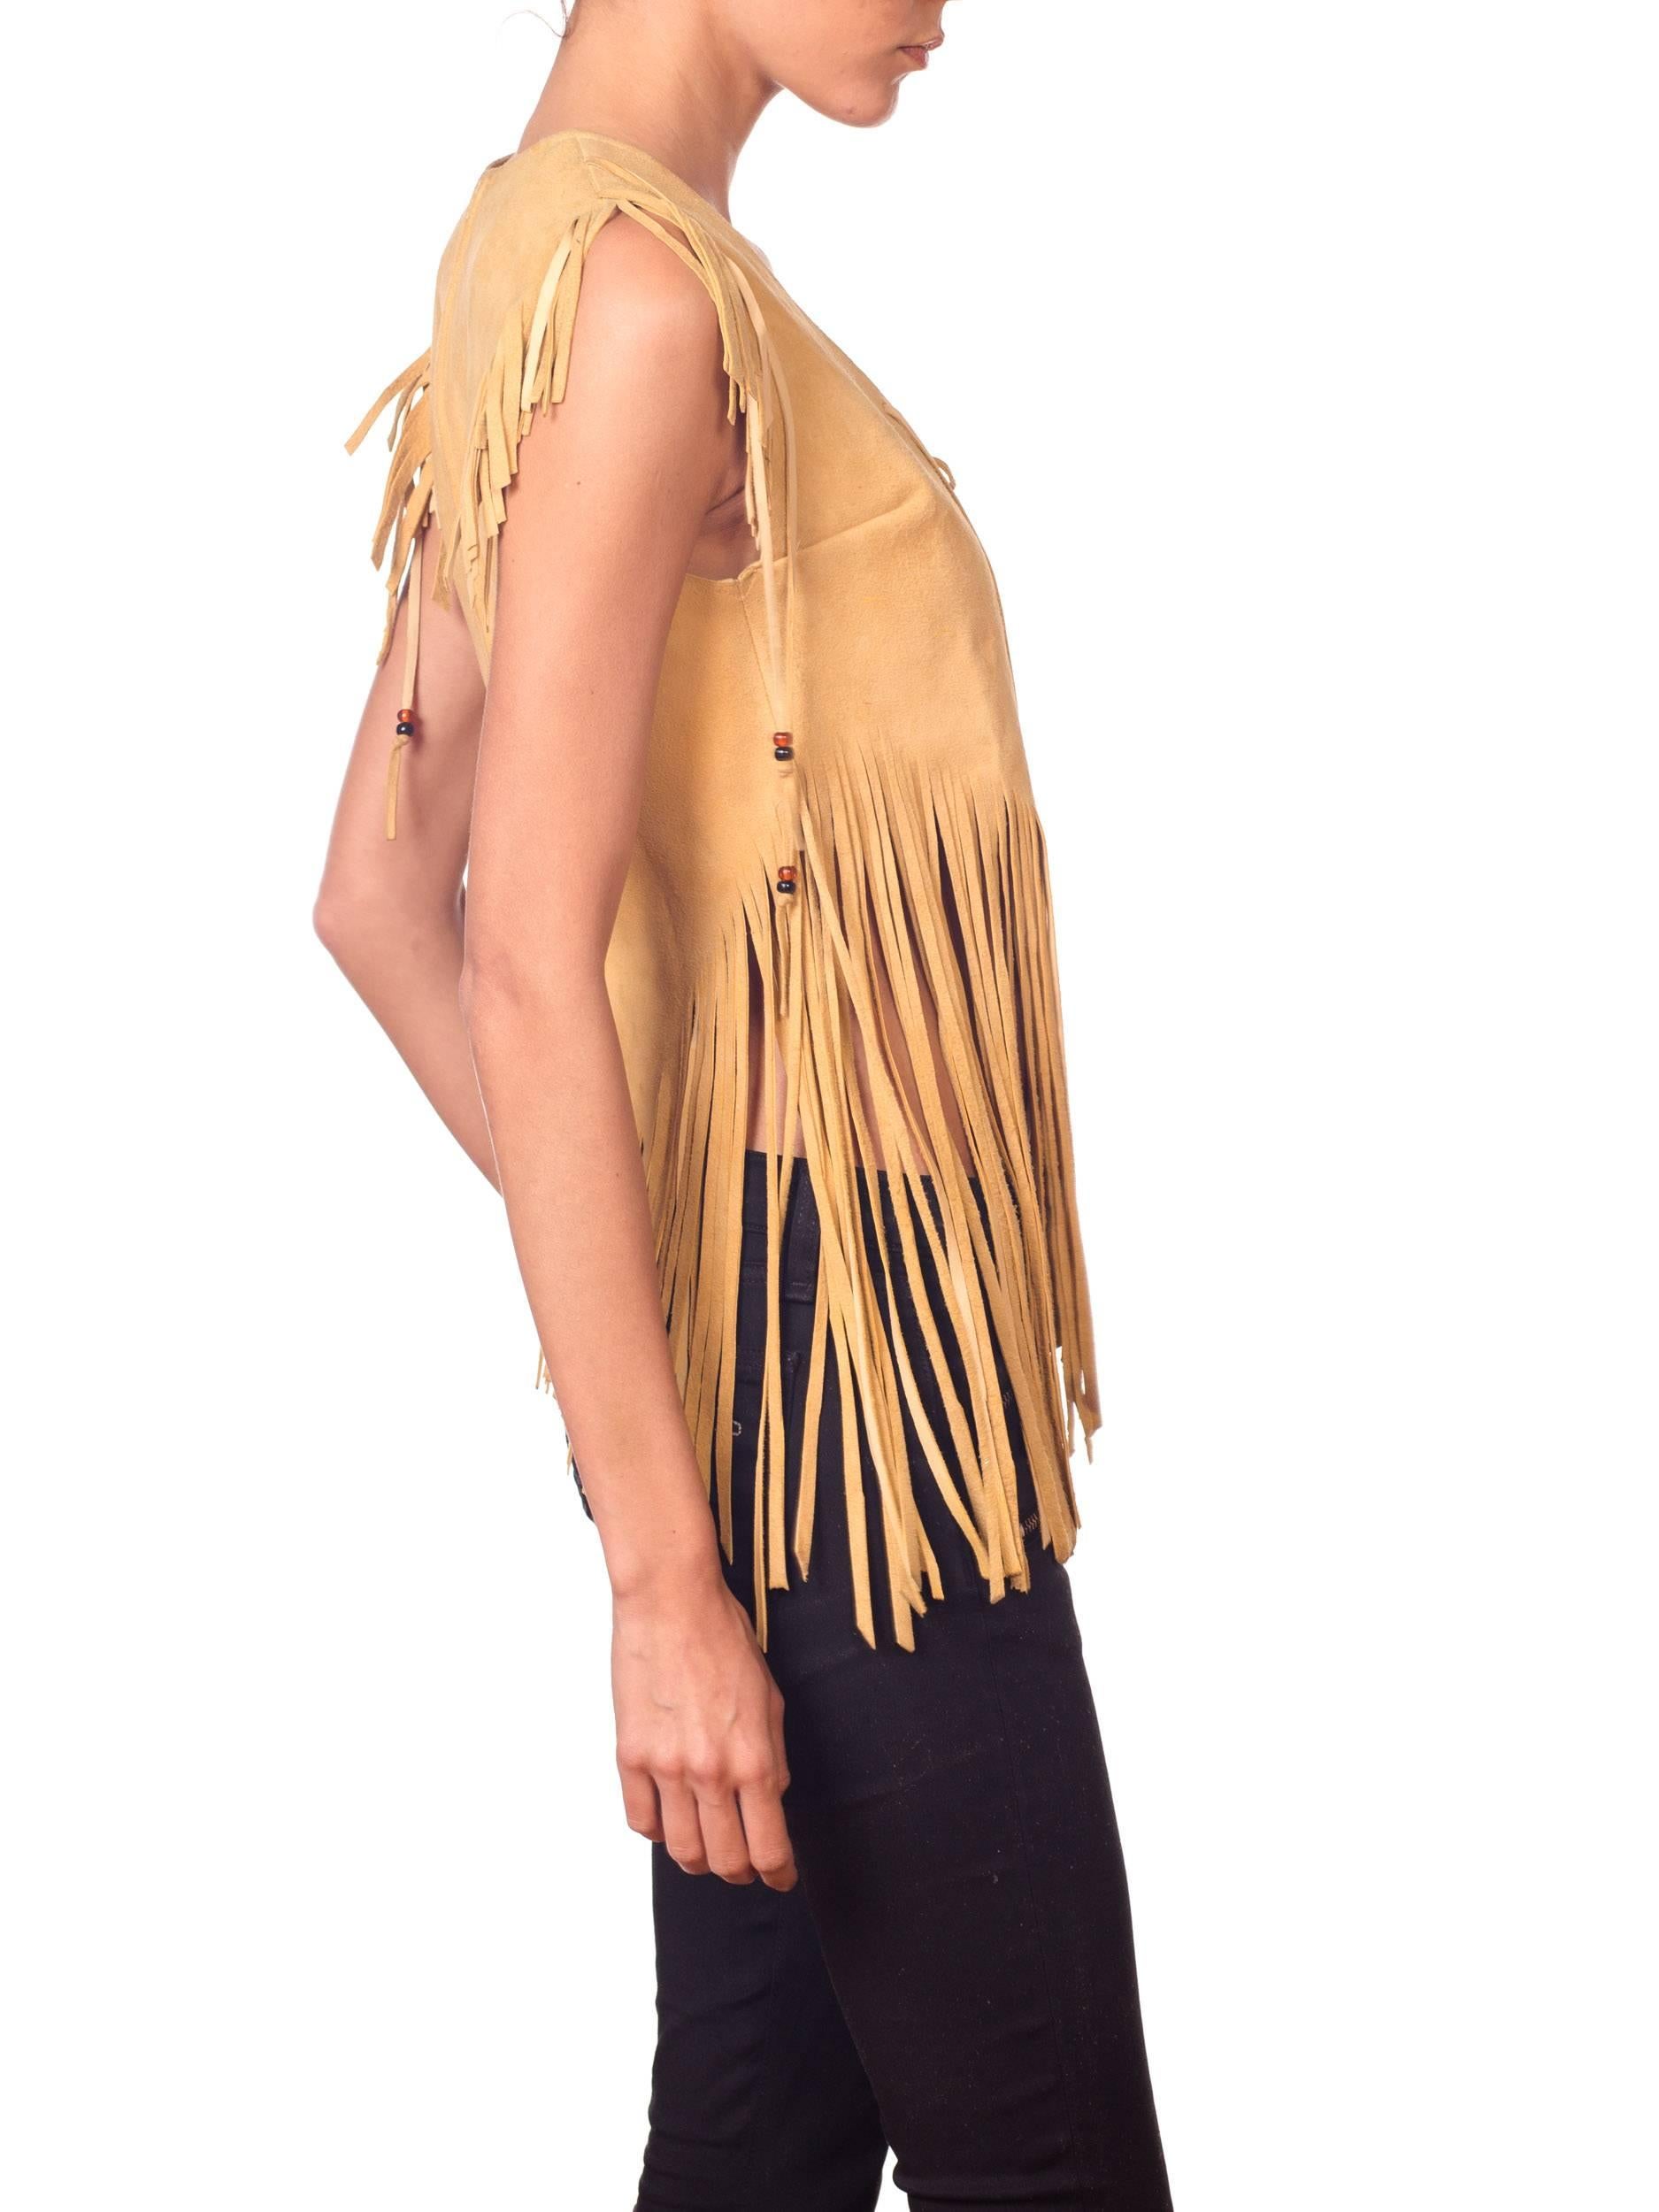 Women's 70s Leather Fringe Crop Top with Beads